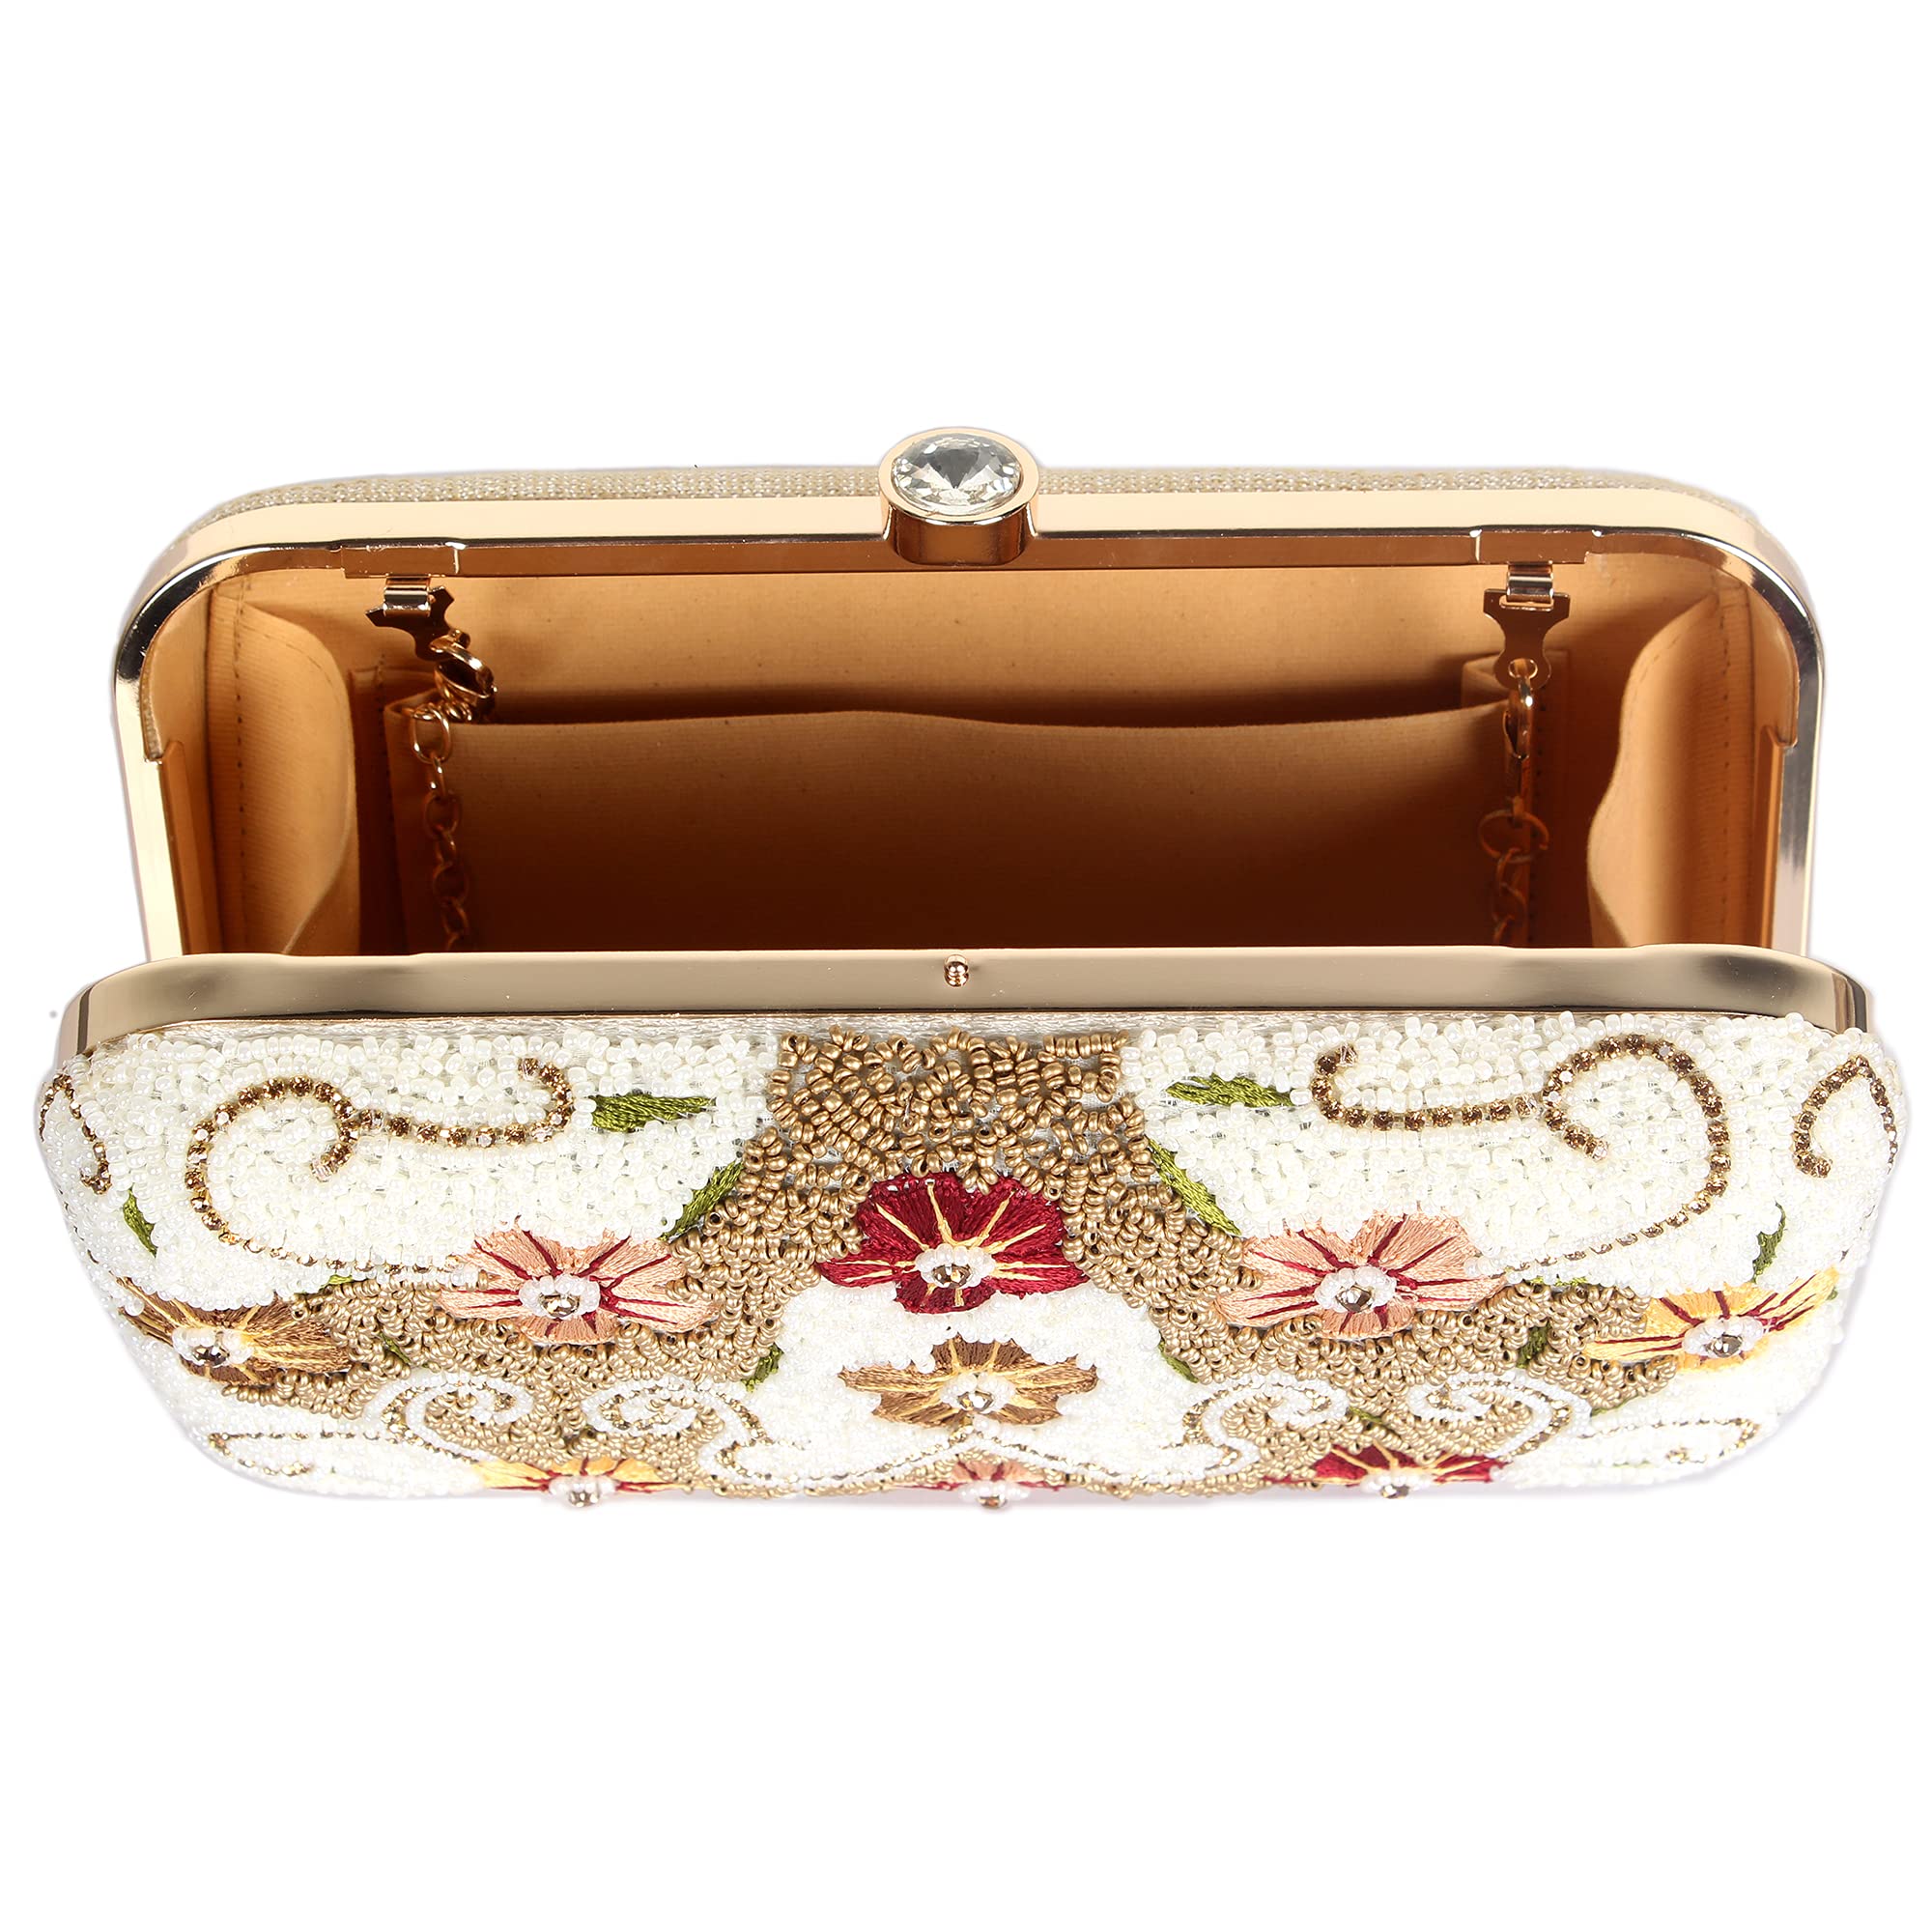 Buy THE CLOWNFISH Womens Wrist Wallet Clutch Purse with embroidered design  at